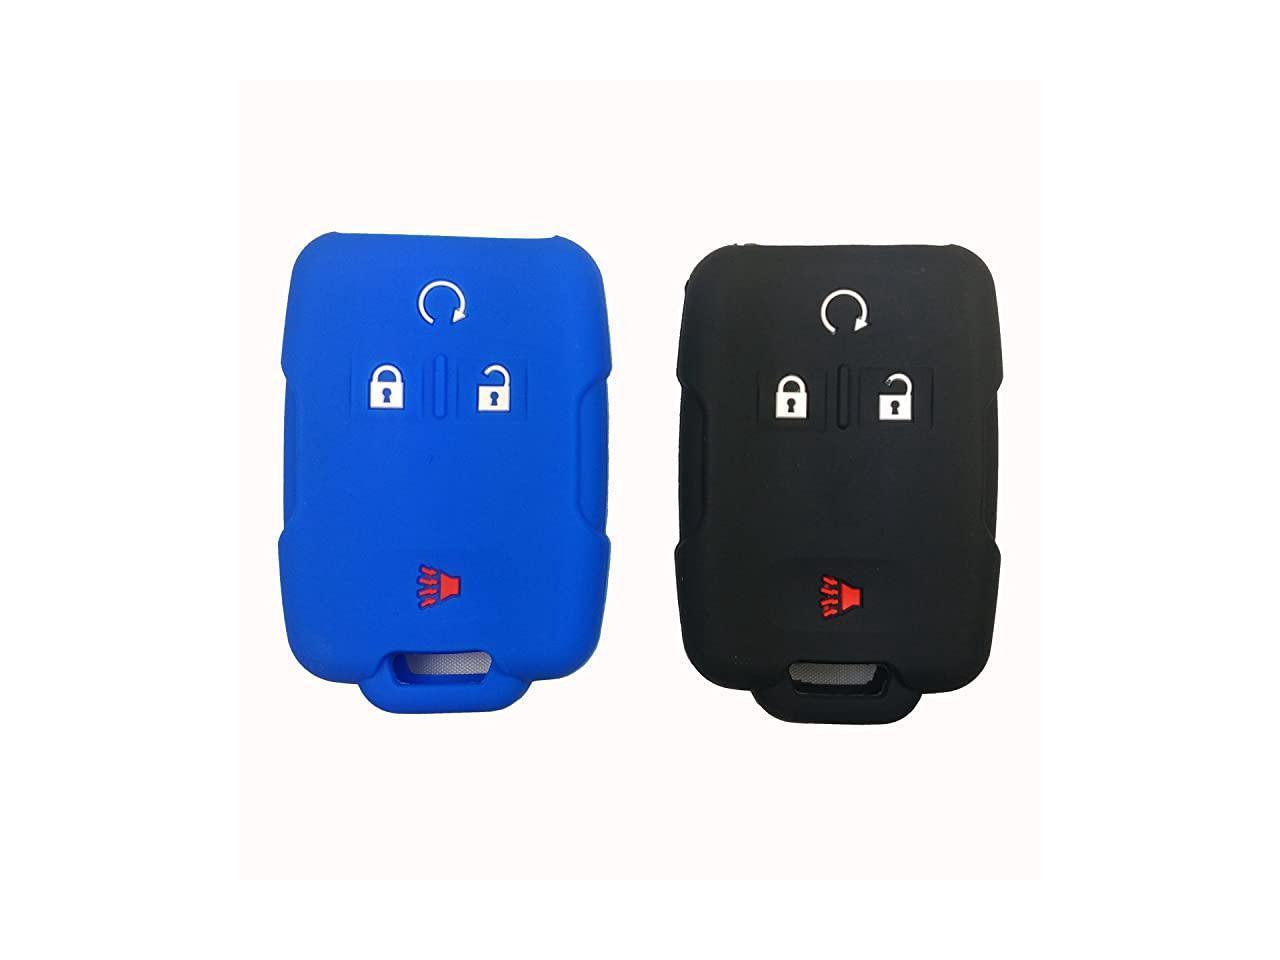 2x New Replacement Keyless Key Fob Remote For Chevy GMC Shell Case Only 13577771 